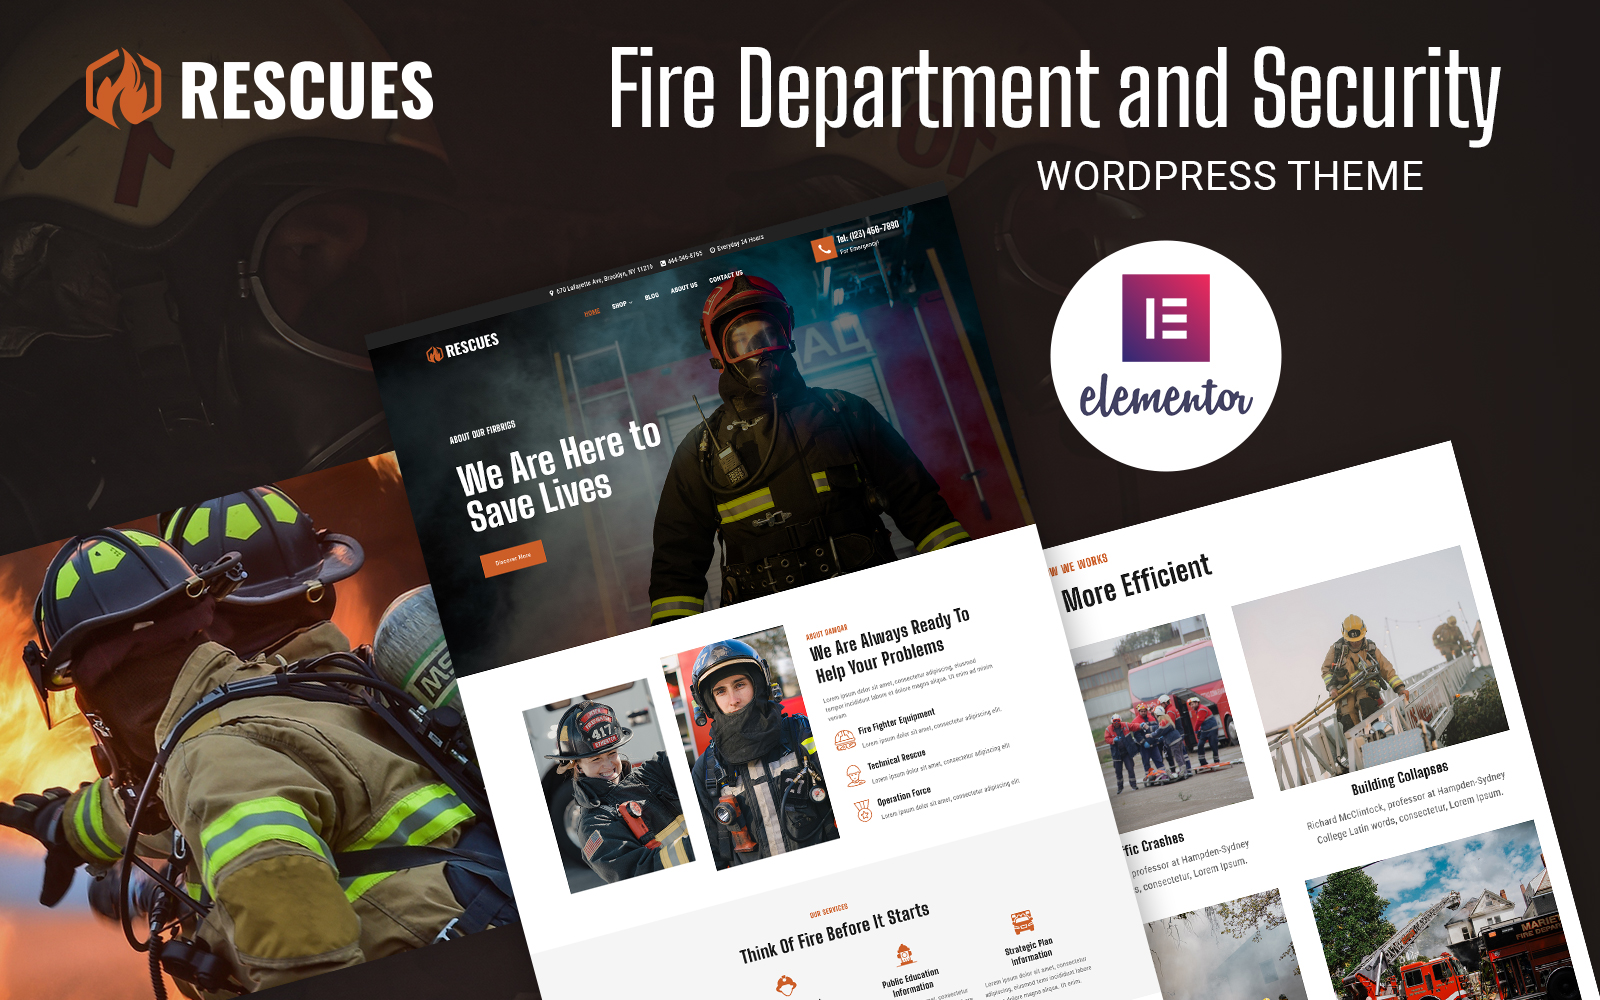 Rescues - Fire Department and Security Business WordPress Theme